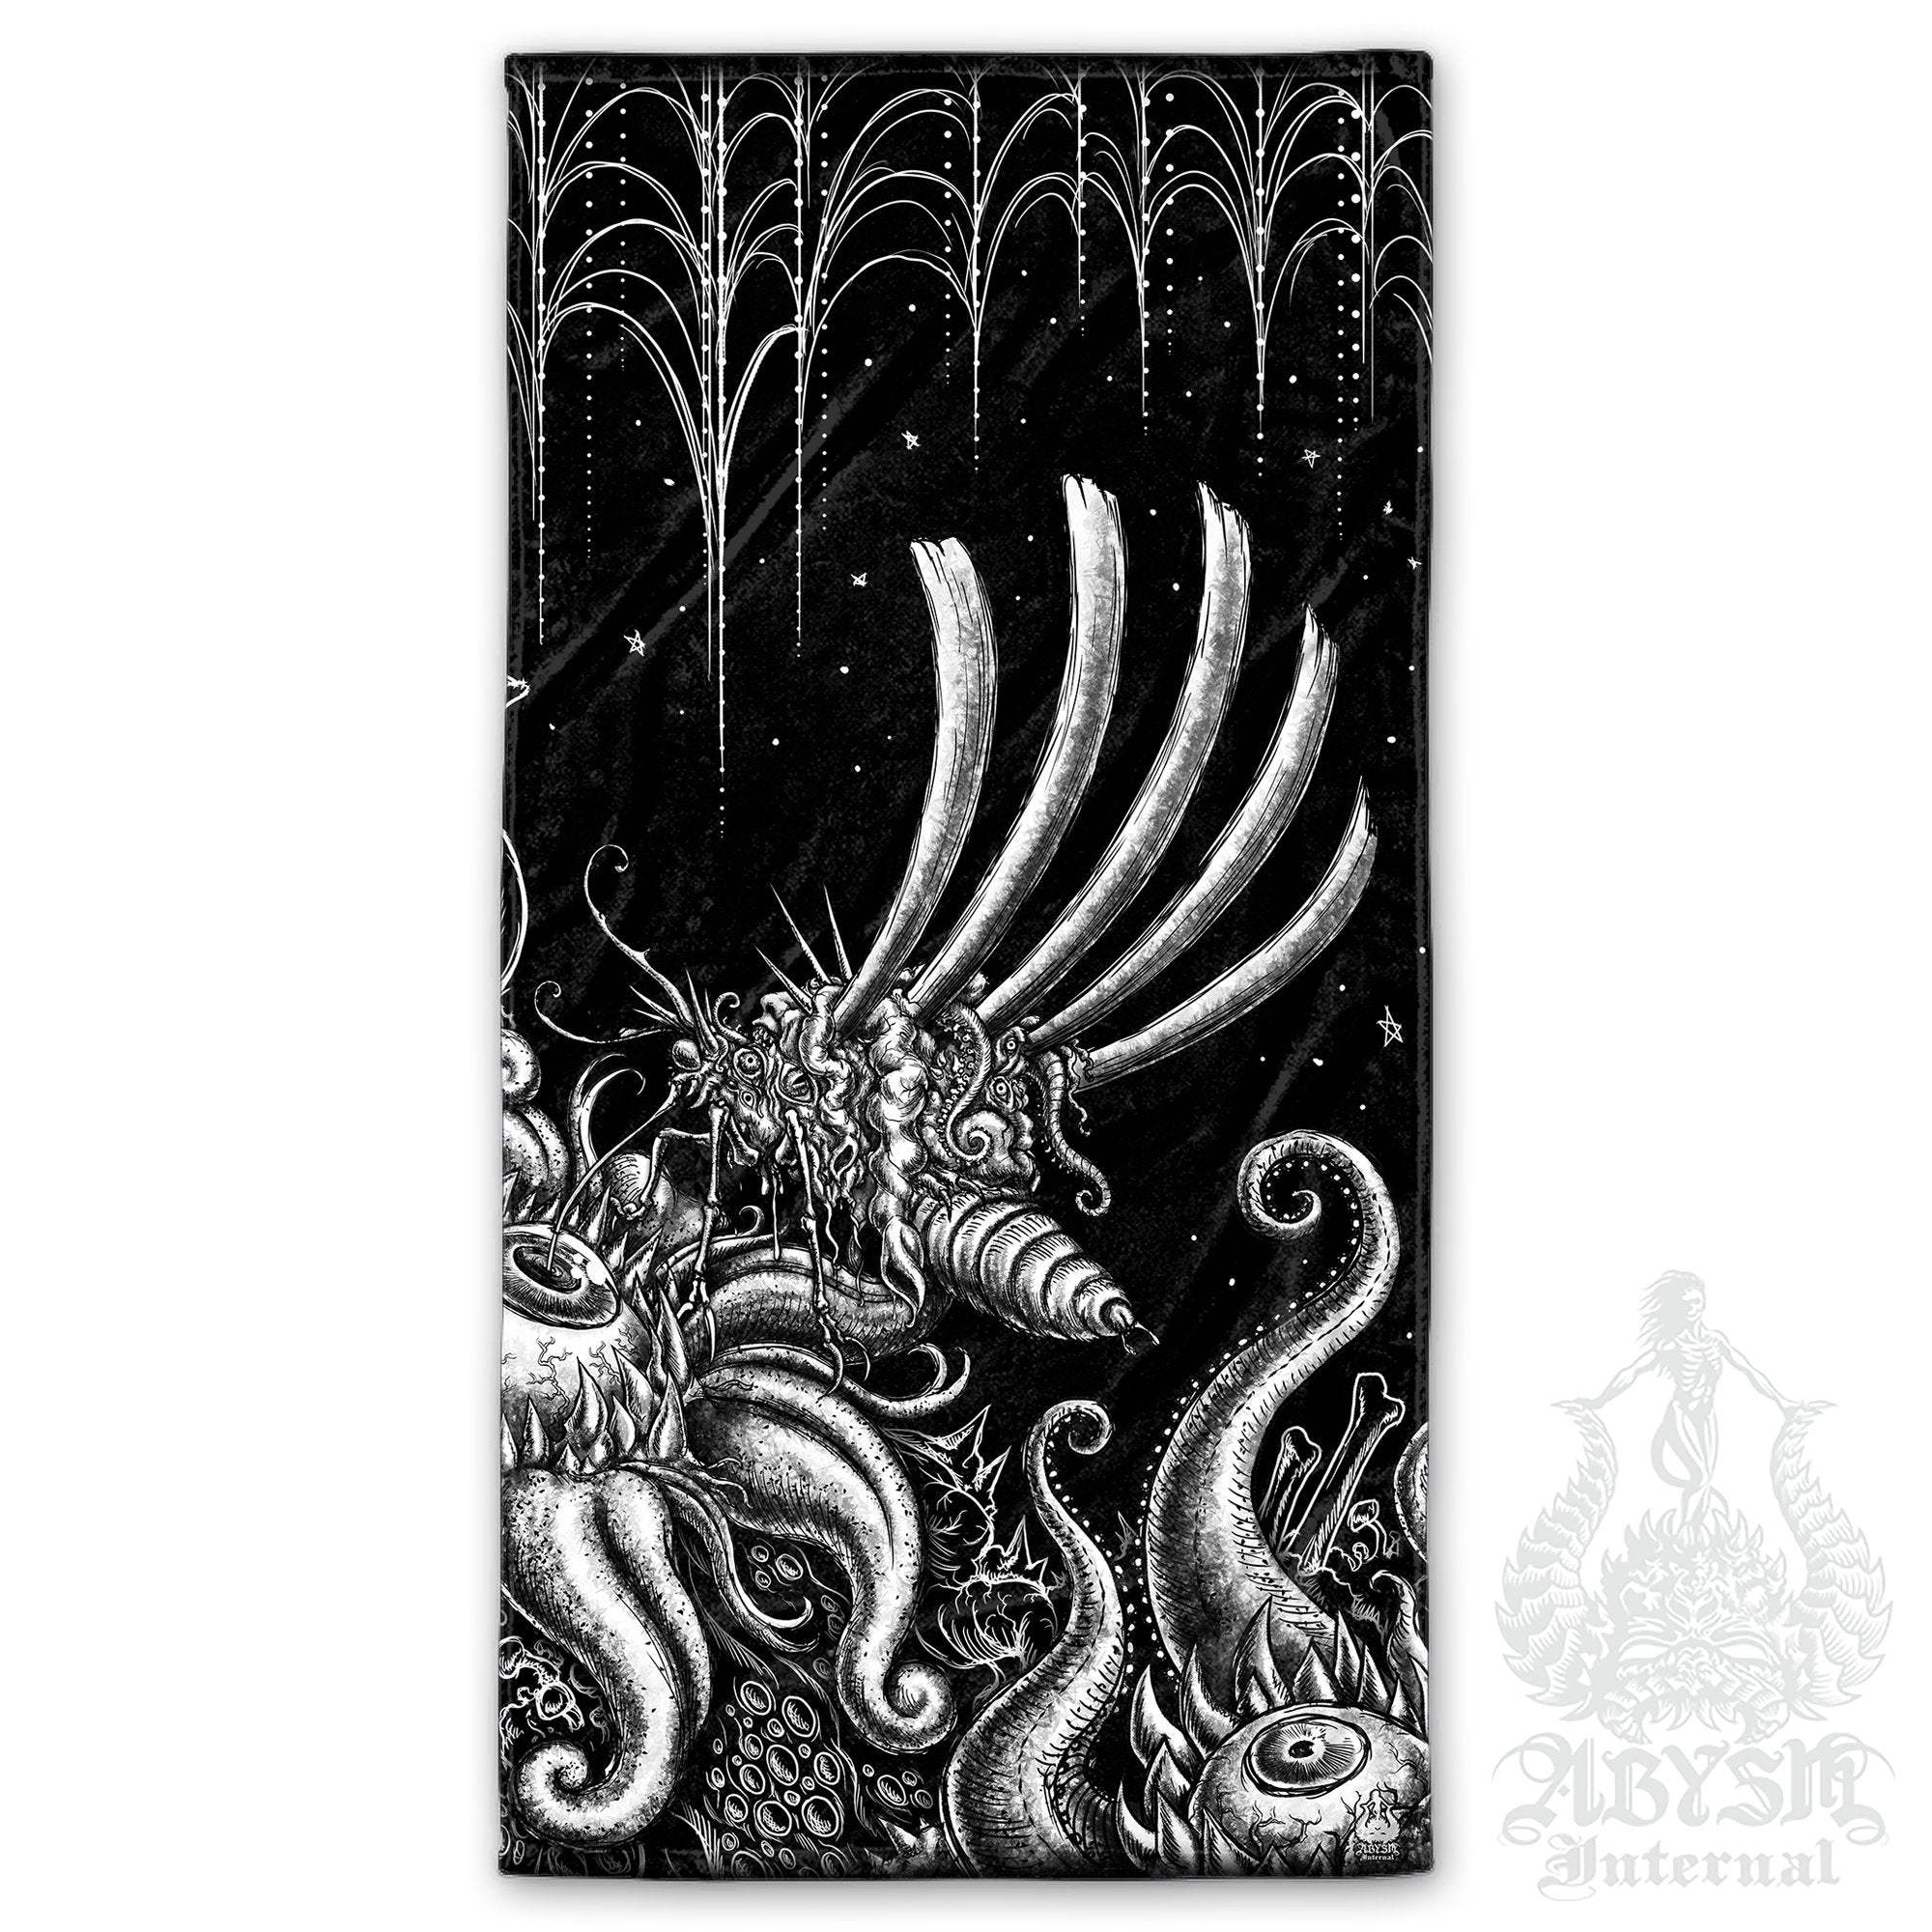 Horror Beach Towel, Gift Ideas for Goths or Metalheads - Gothic Hell, Bloodfly - Abysm Internal